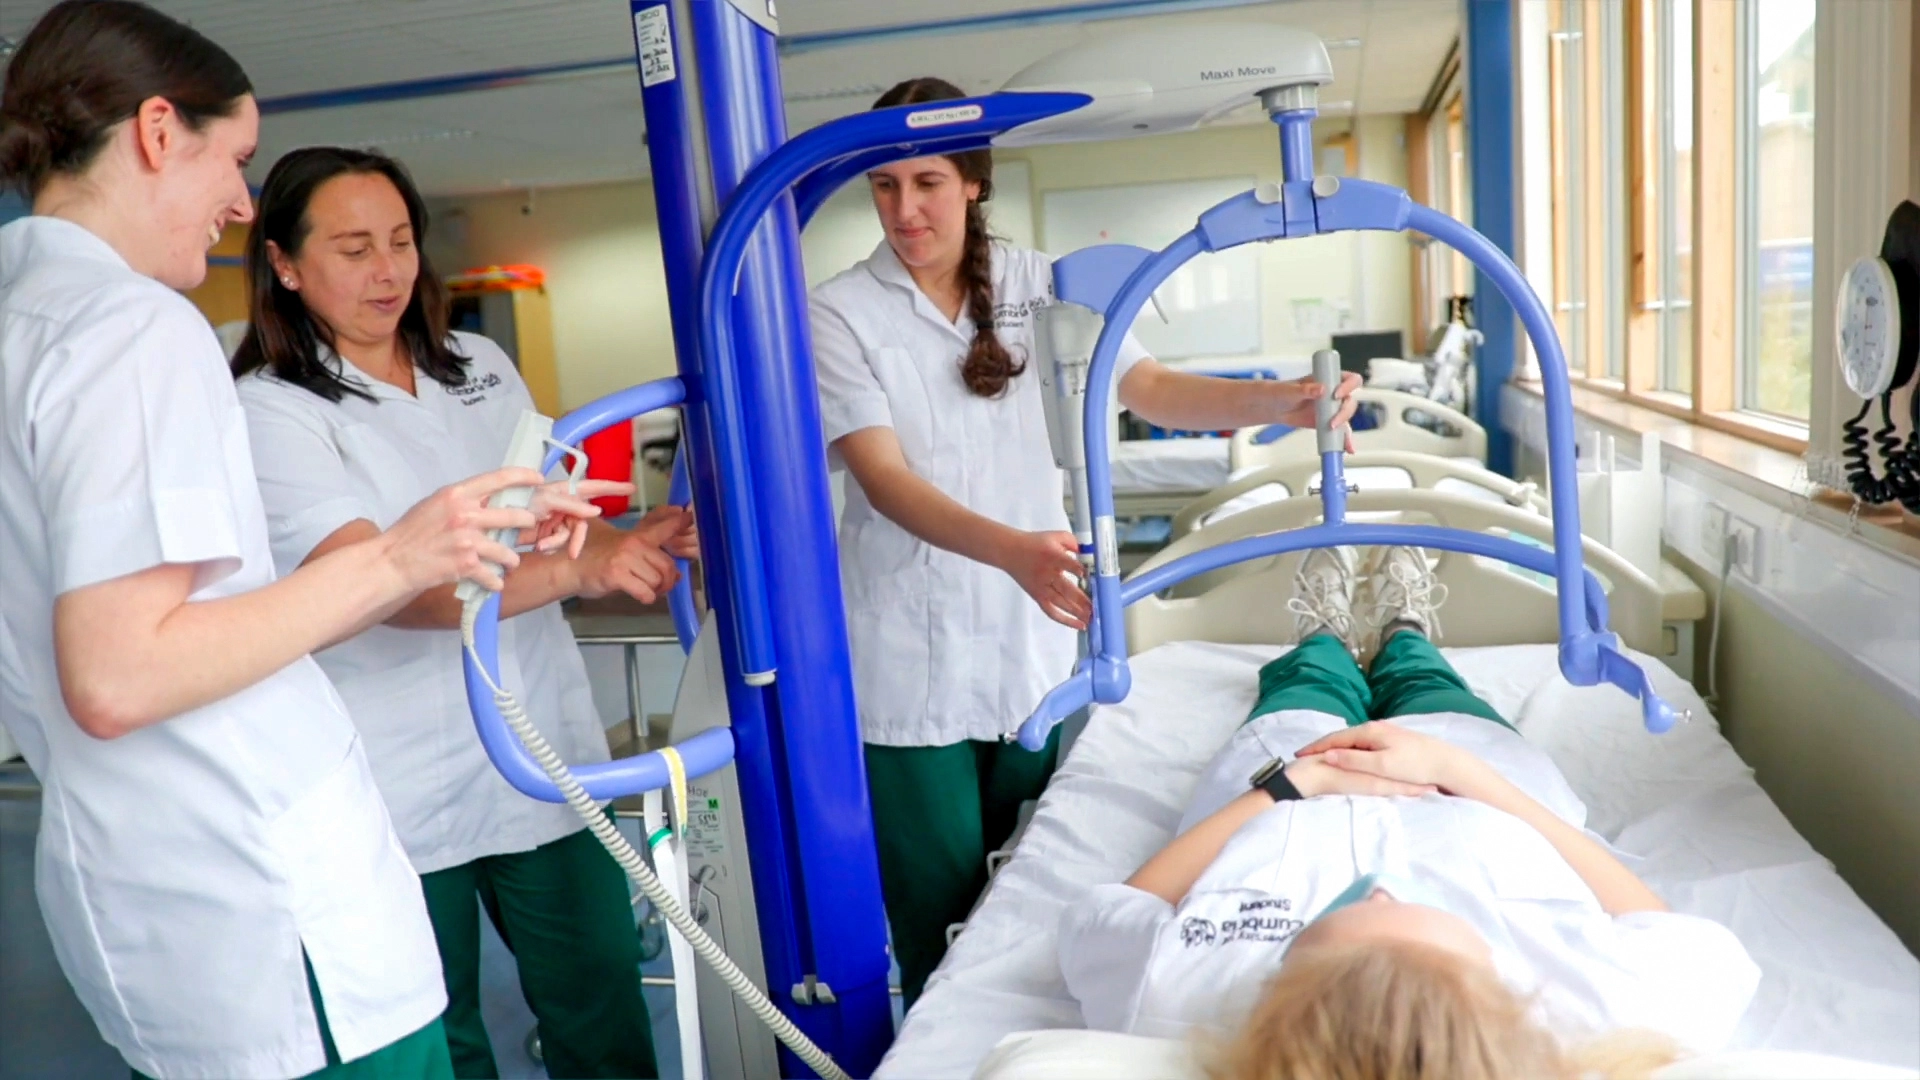 Occupational Therapy students using facilities